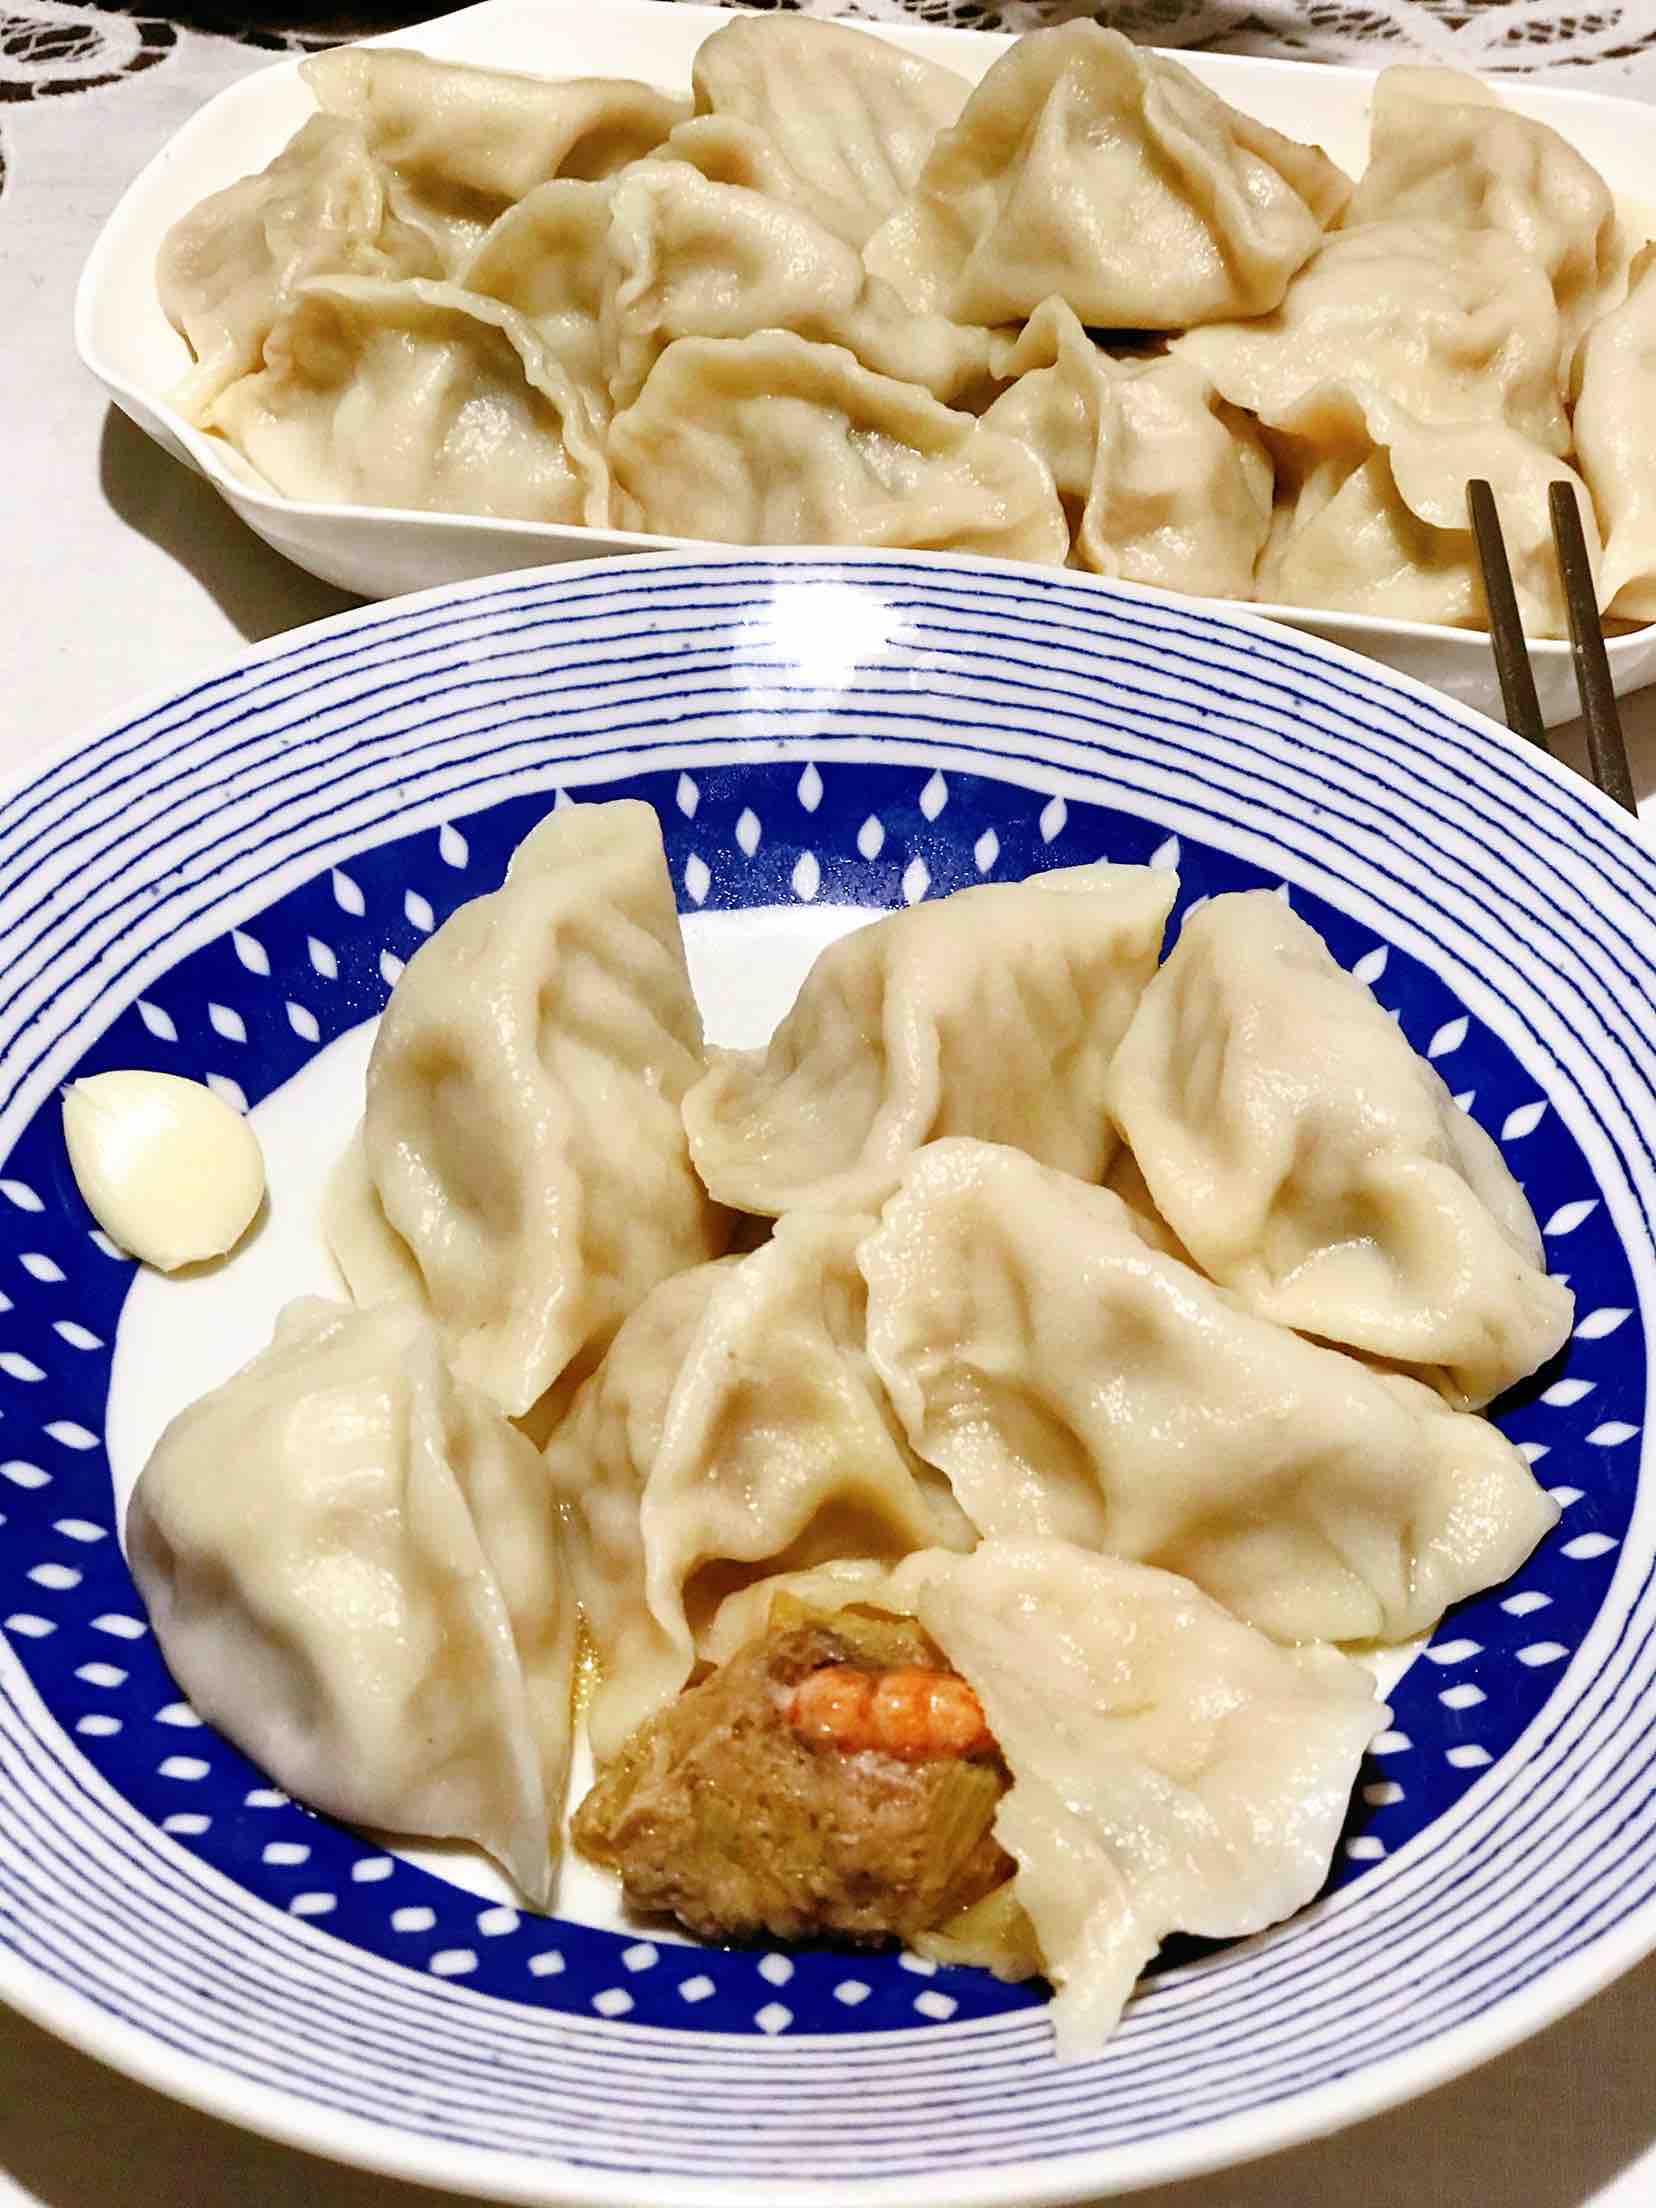 Big and Delicious Pork, Shrimp and Kidney Bean Dumplings with Thin Skin Stuffing recipe